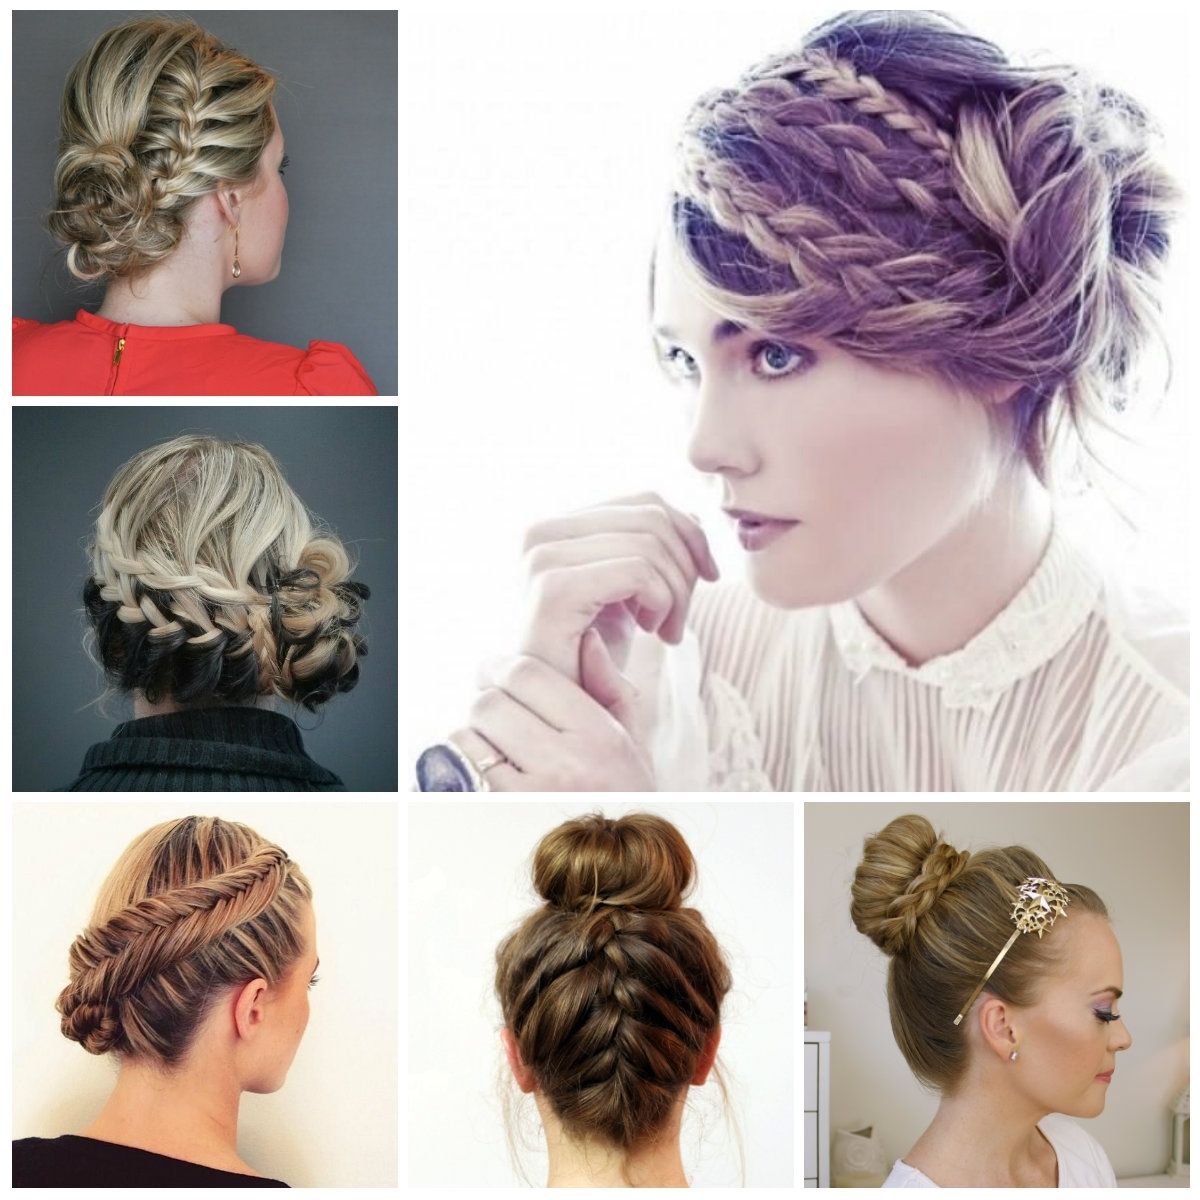 Hairstyle With Braids Coolest Braided Updo Hairstyles Haircuts Inside Cool Updo Hairstyles (View 1 of 15)